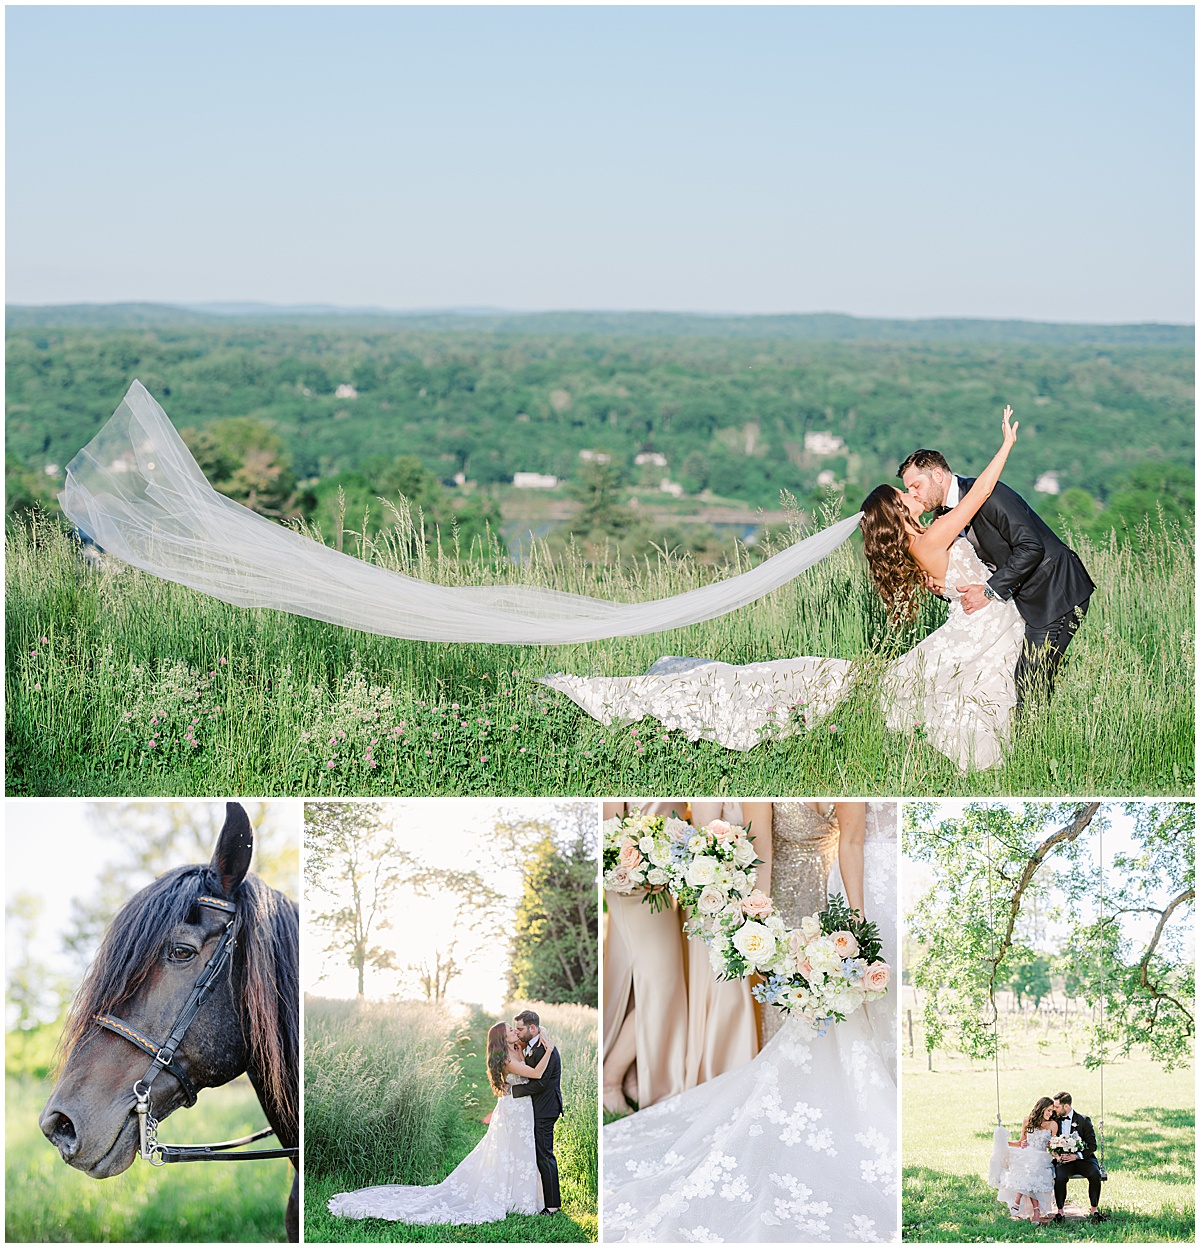 Red Maple Vineyard wedding rustic setting in the Hudson Valley, New York